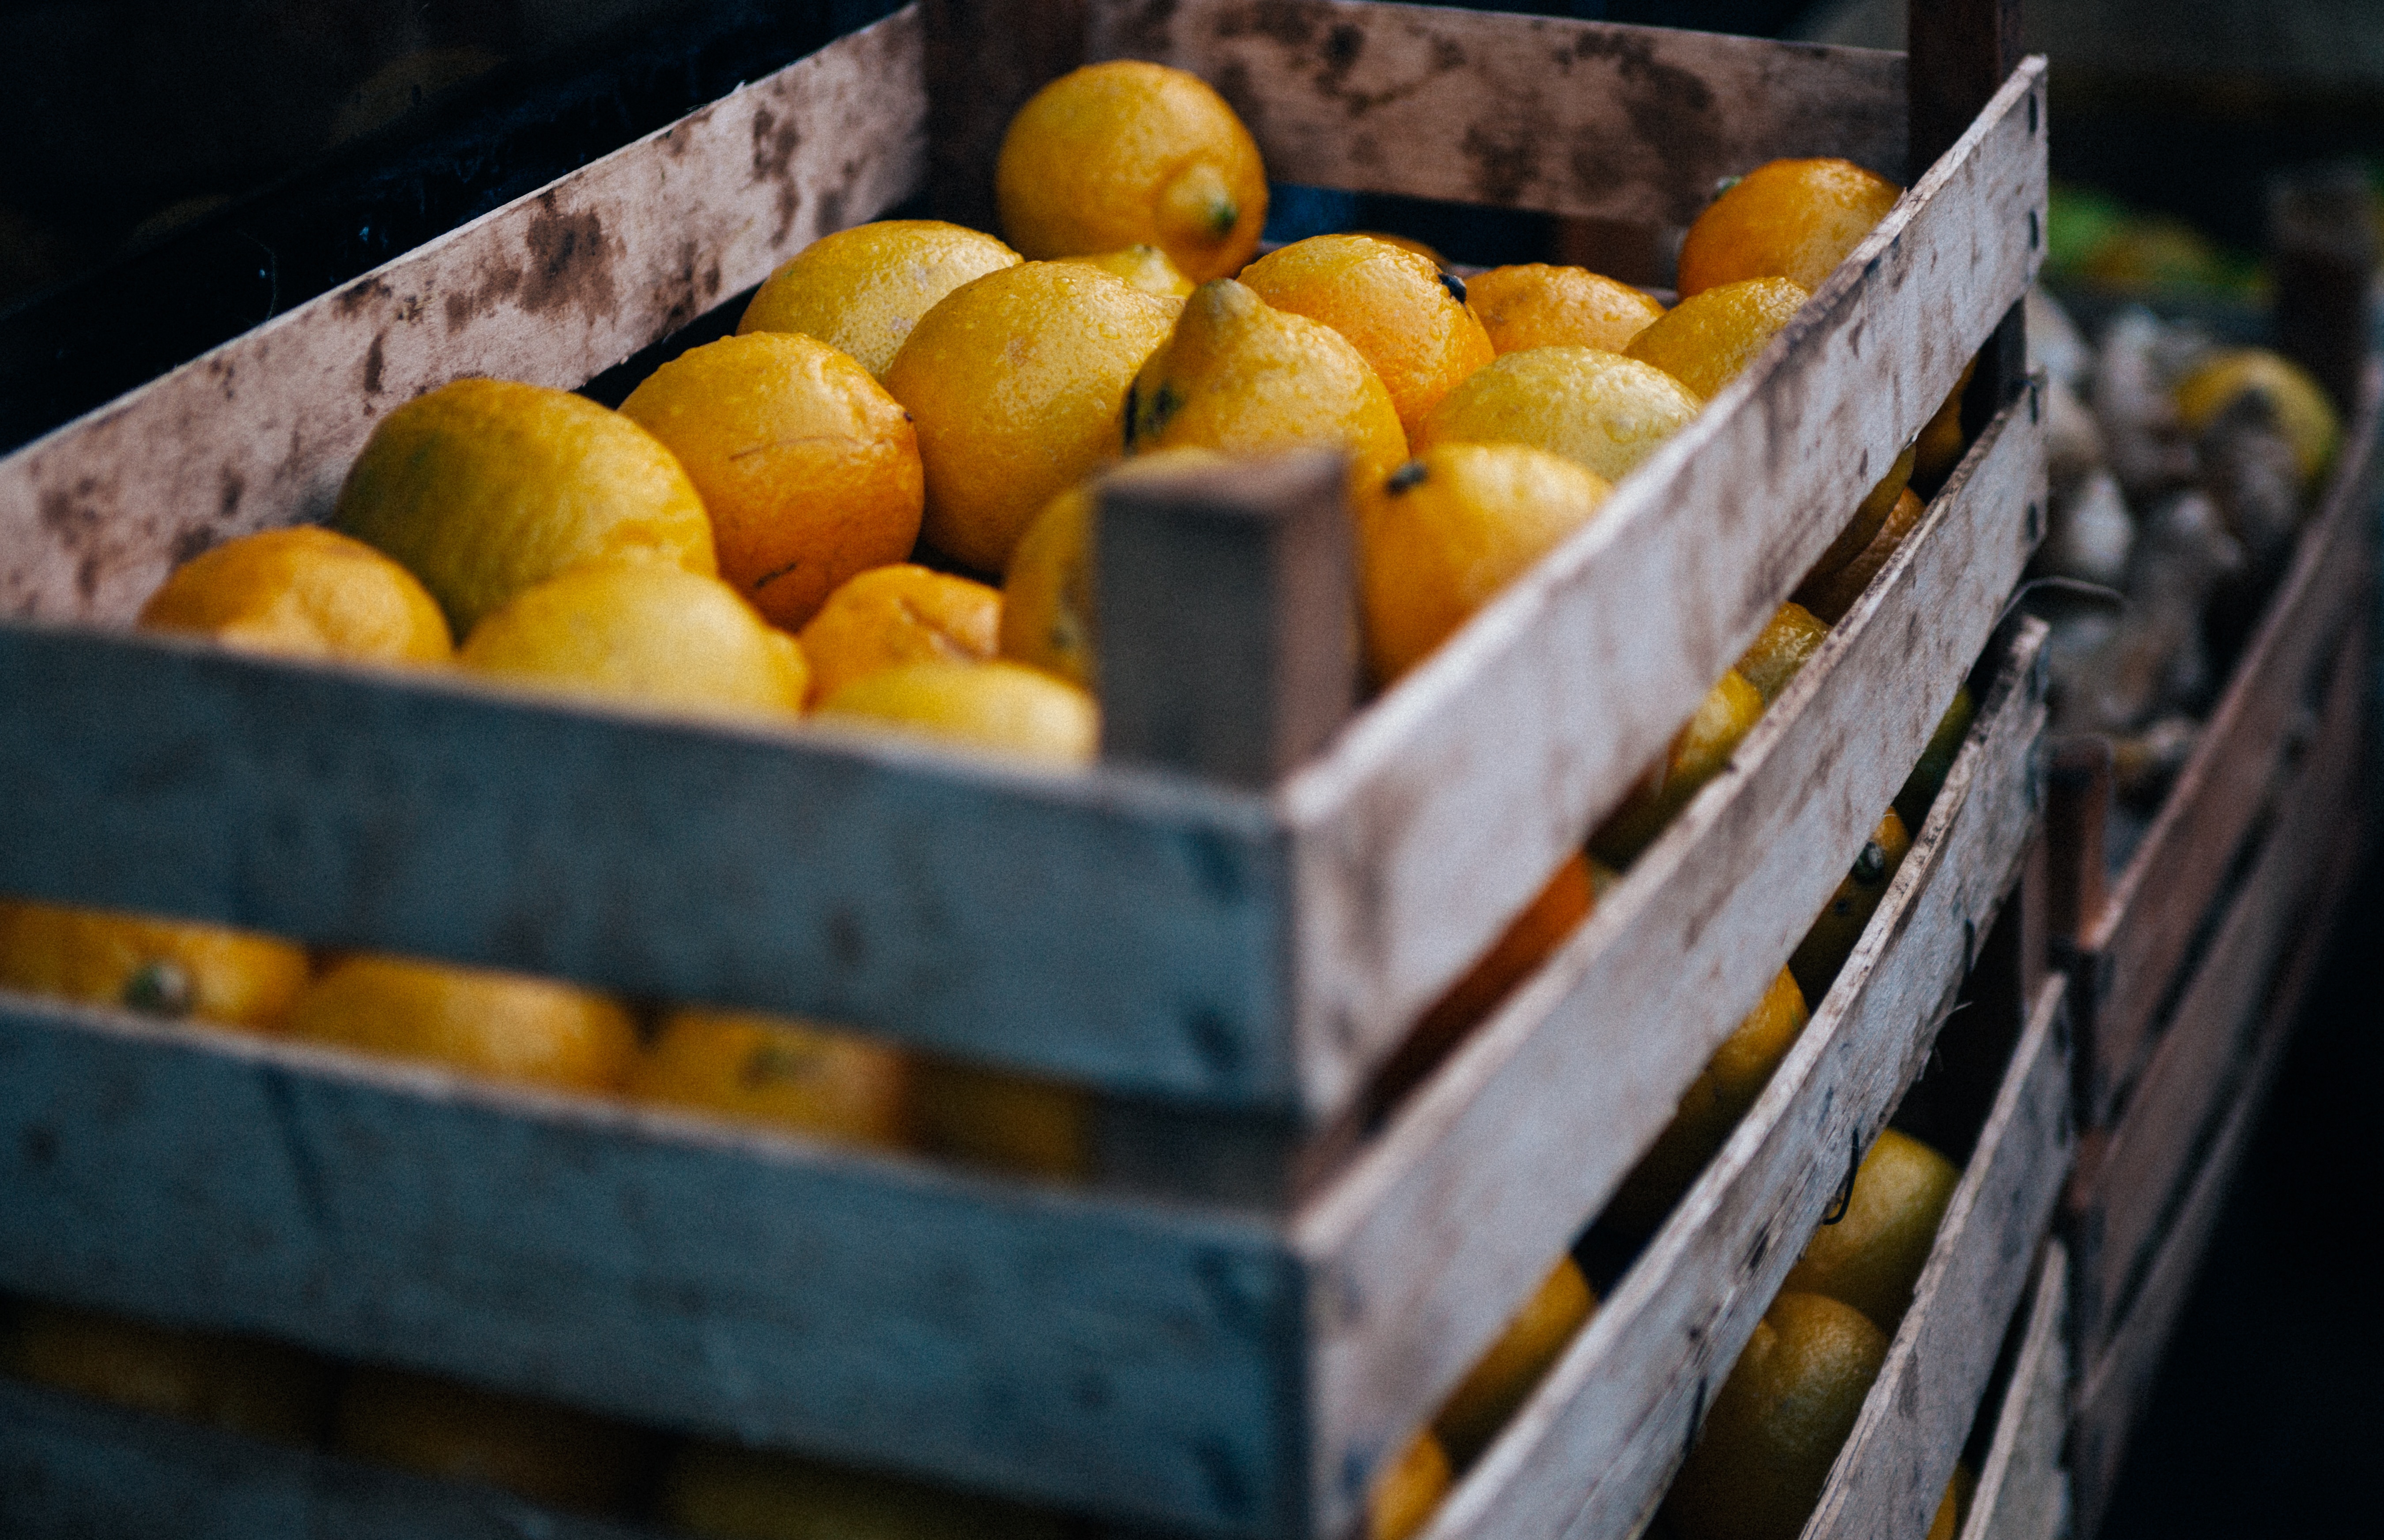 yellow lemon lot in brown wooden crate shallow focus photography